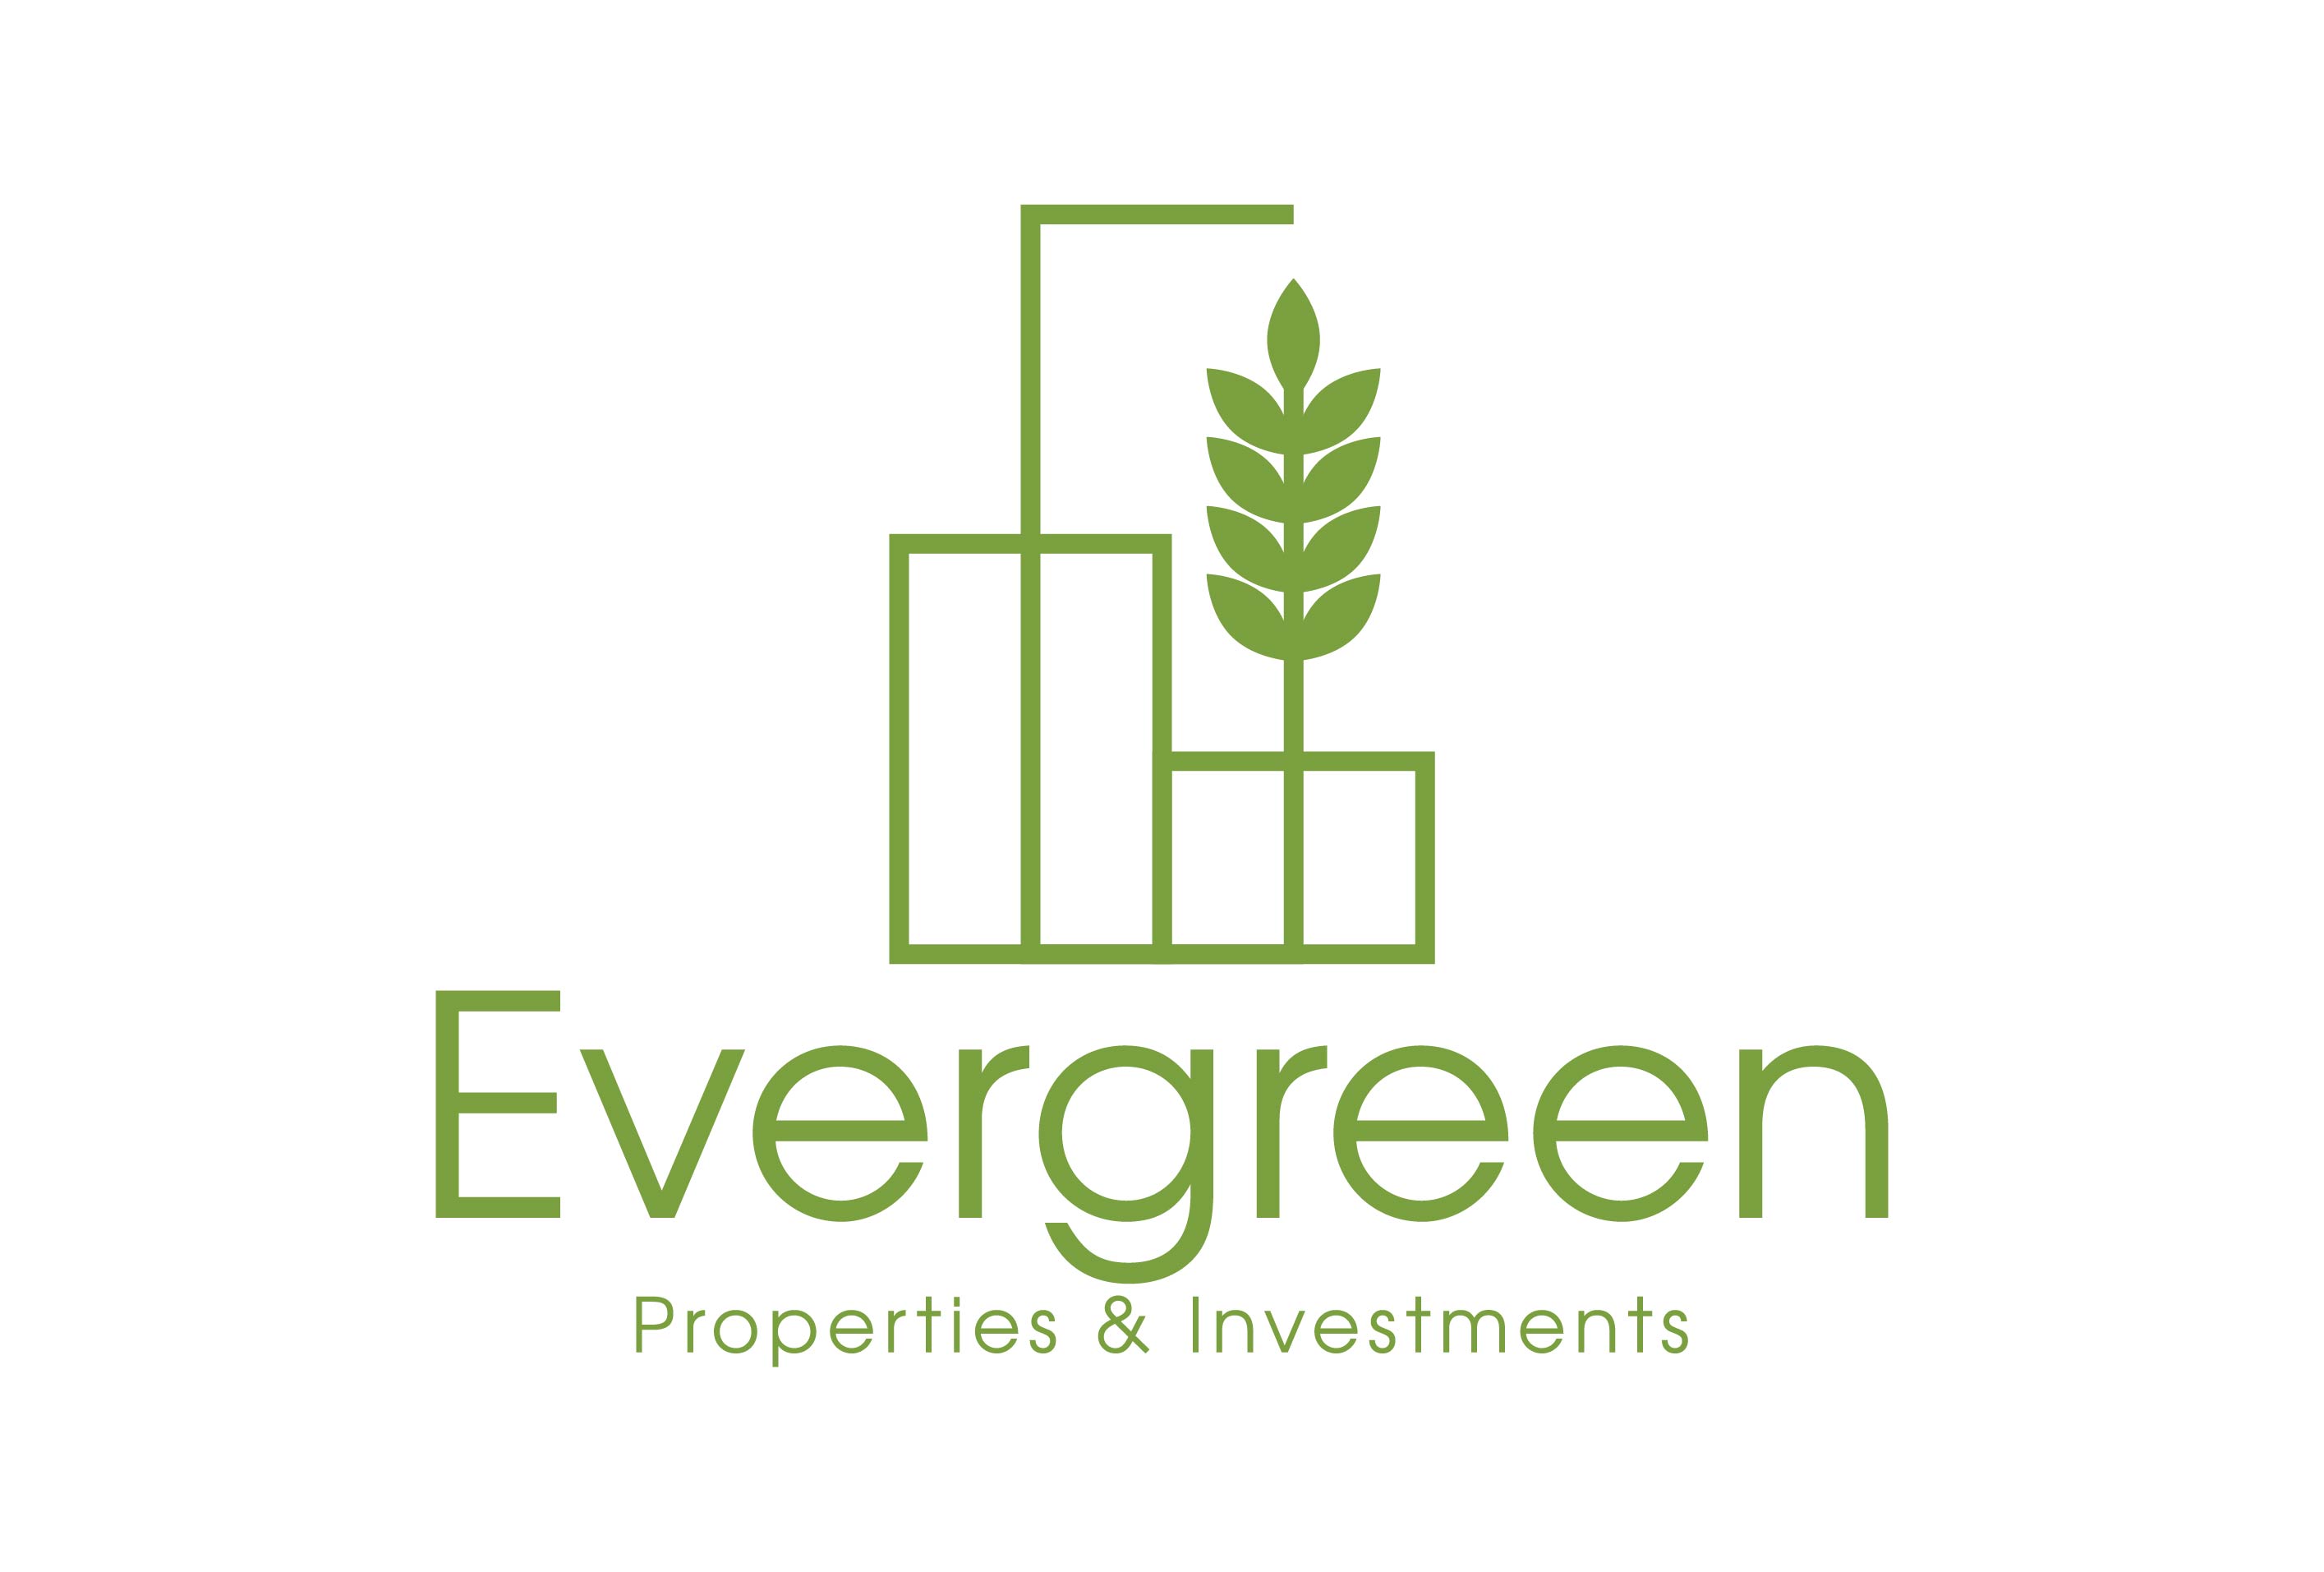 Dan Barcelon Real Estate - Evergreen Properties and Investments logo